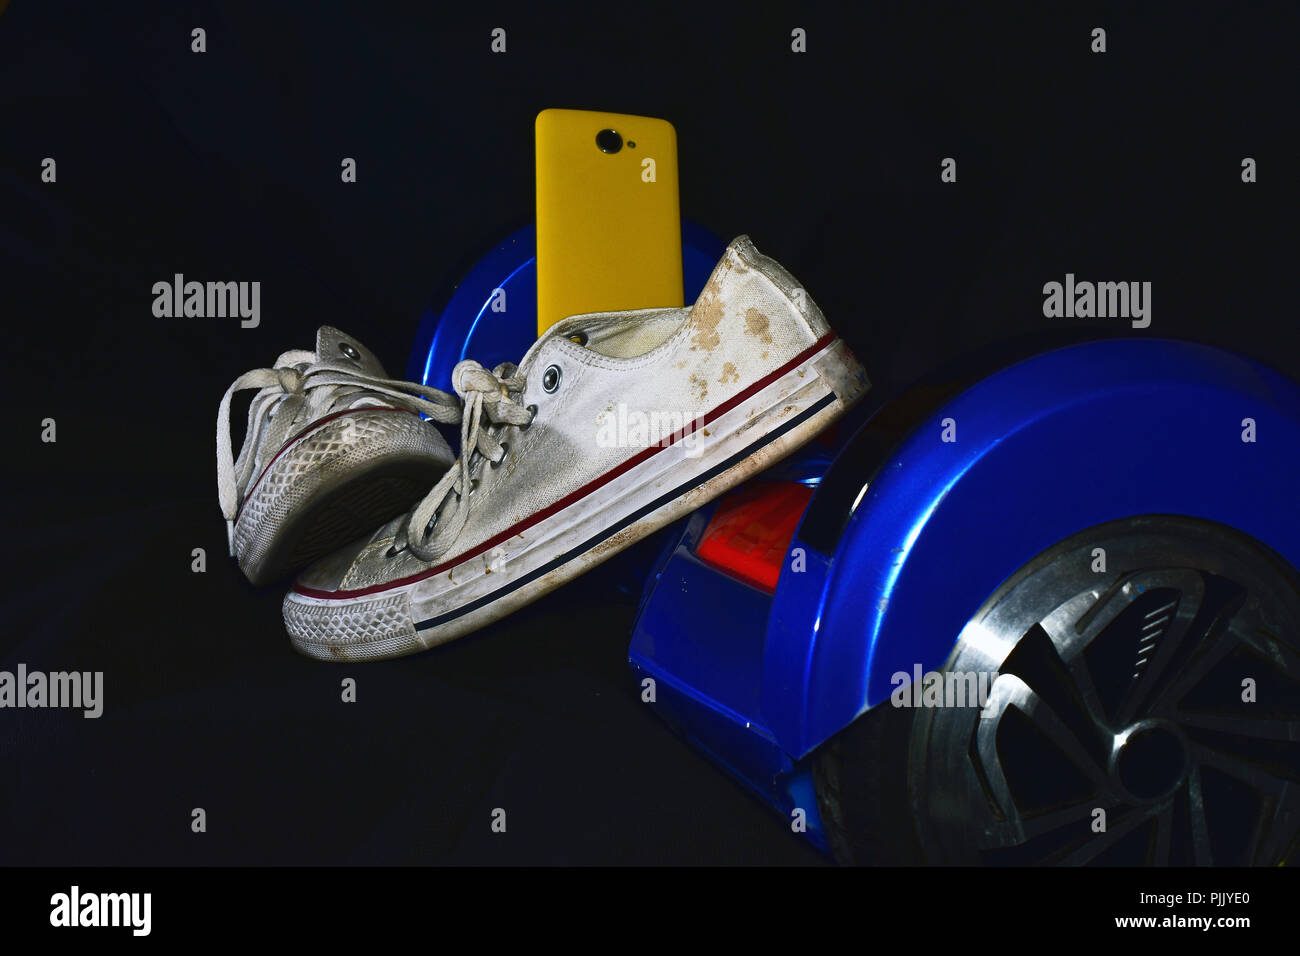 dirty and used sneakers on electric scooter Stock Photo